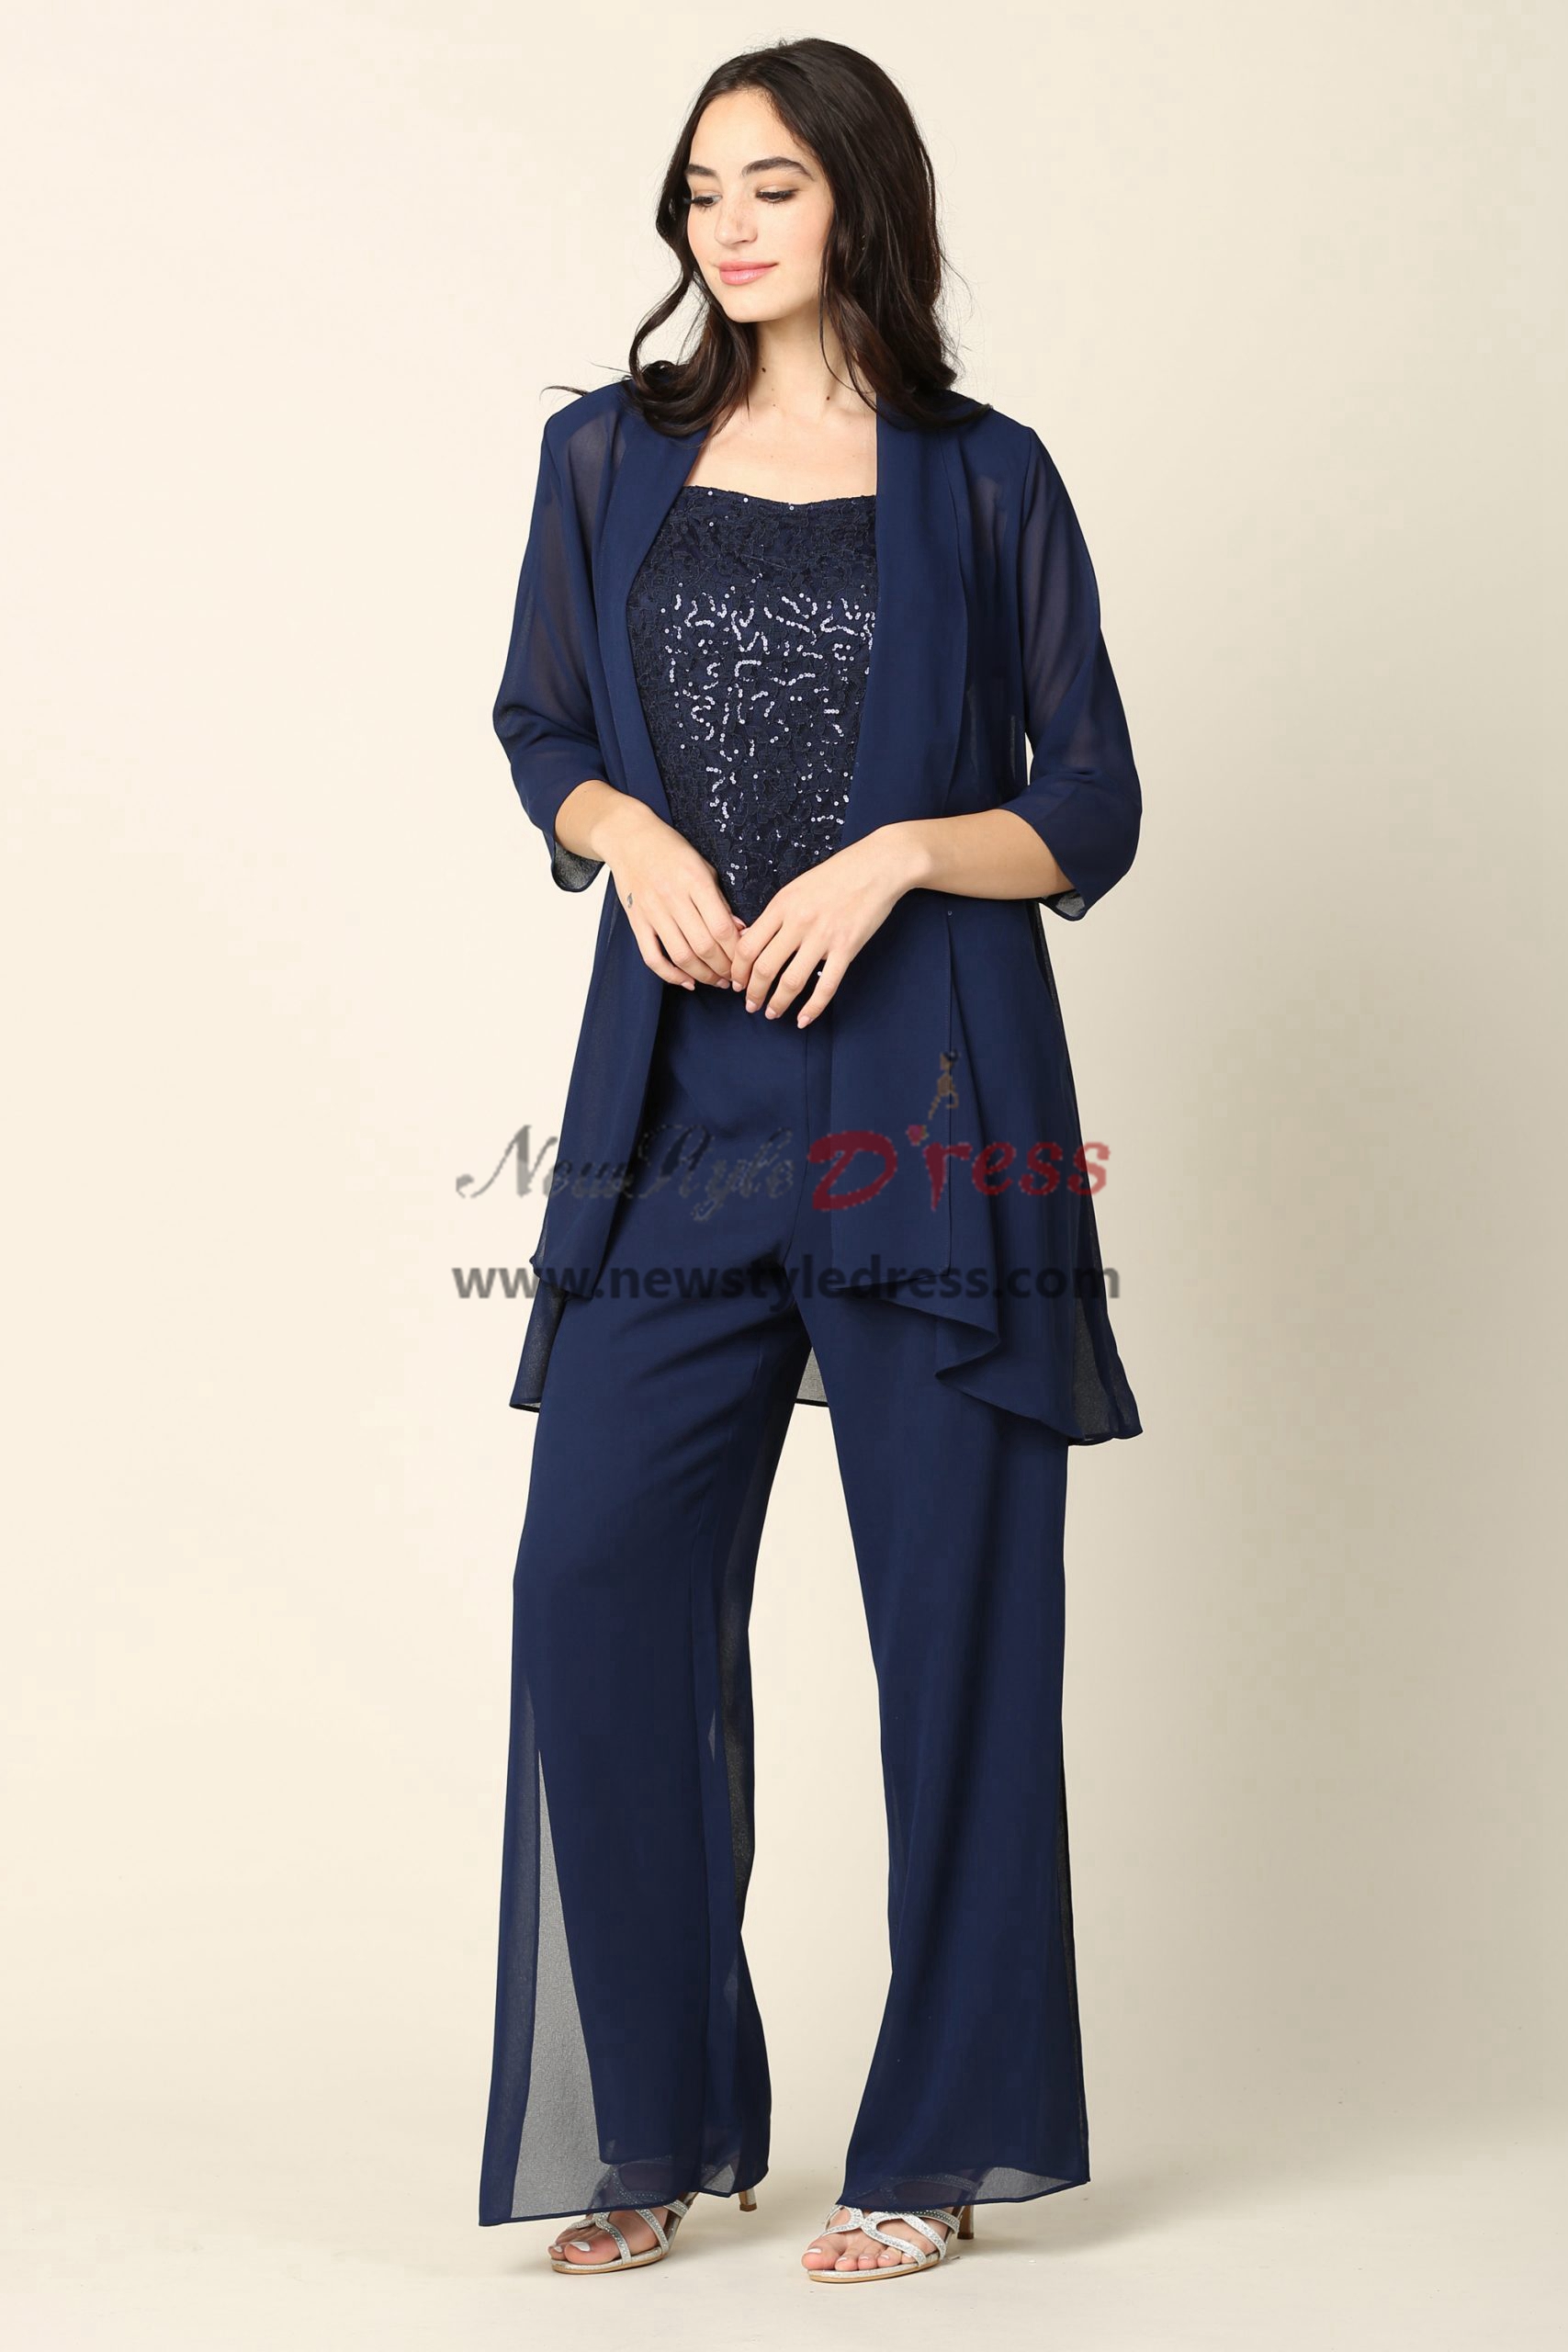 Plus Size Dark Navy Chiffon Mother of the Bride Pant Suits with Jacket ...